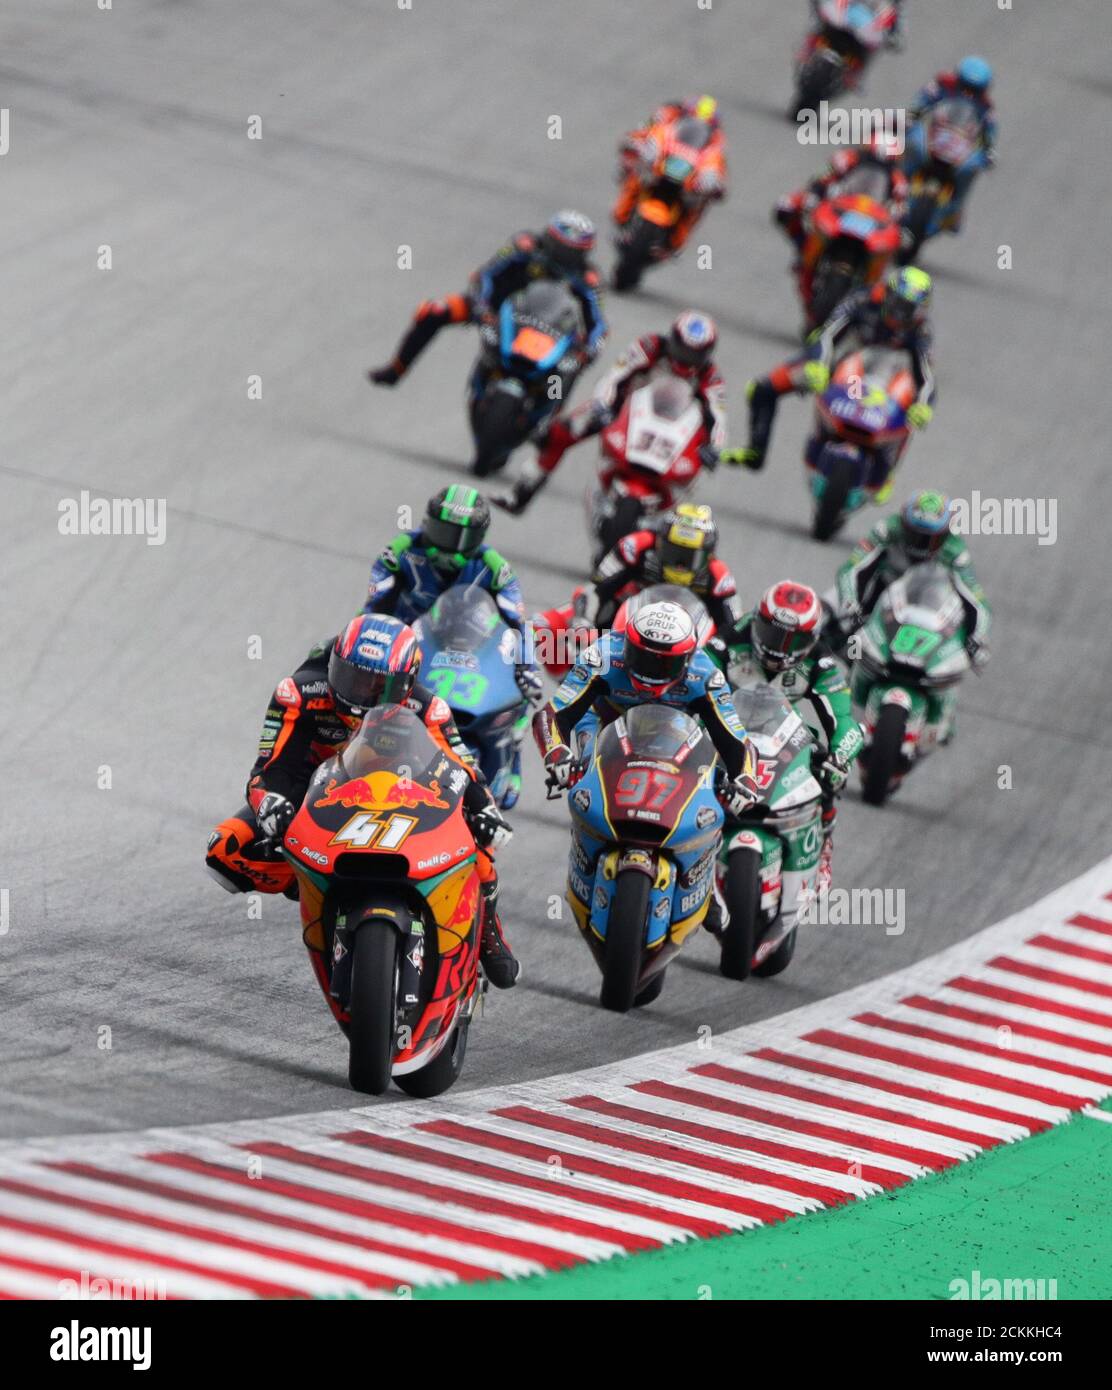 MotoGP - Austrian Grand Prix - Red Bull Ring, Spielberg, Austria - August  11, 2019 Red Bull KTM Ajo's Brad Binder in action during the Moto2 race  REUTERS/Lisi Niesner Stock Photo - Alamy